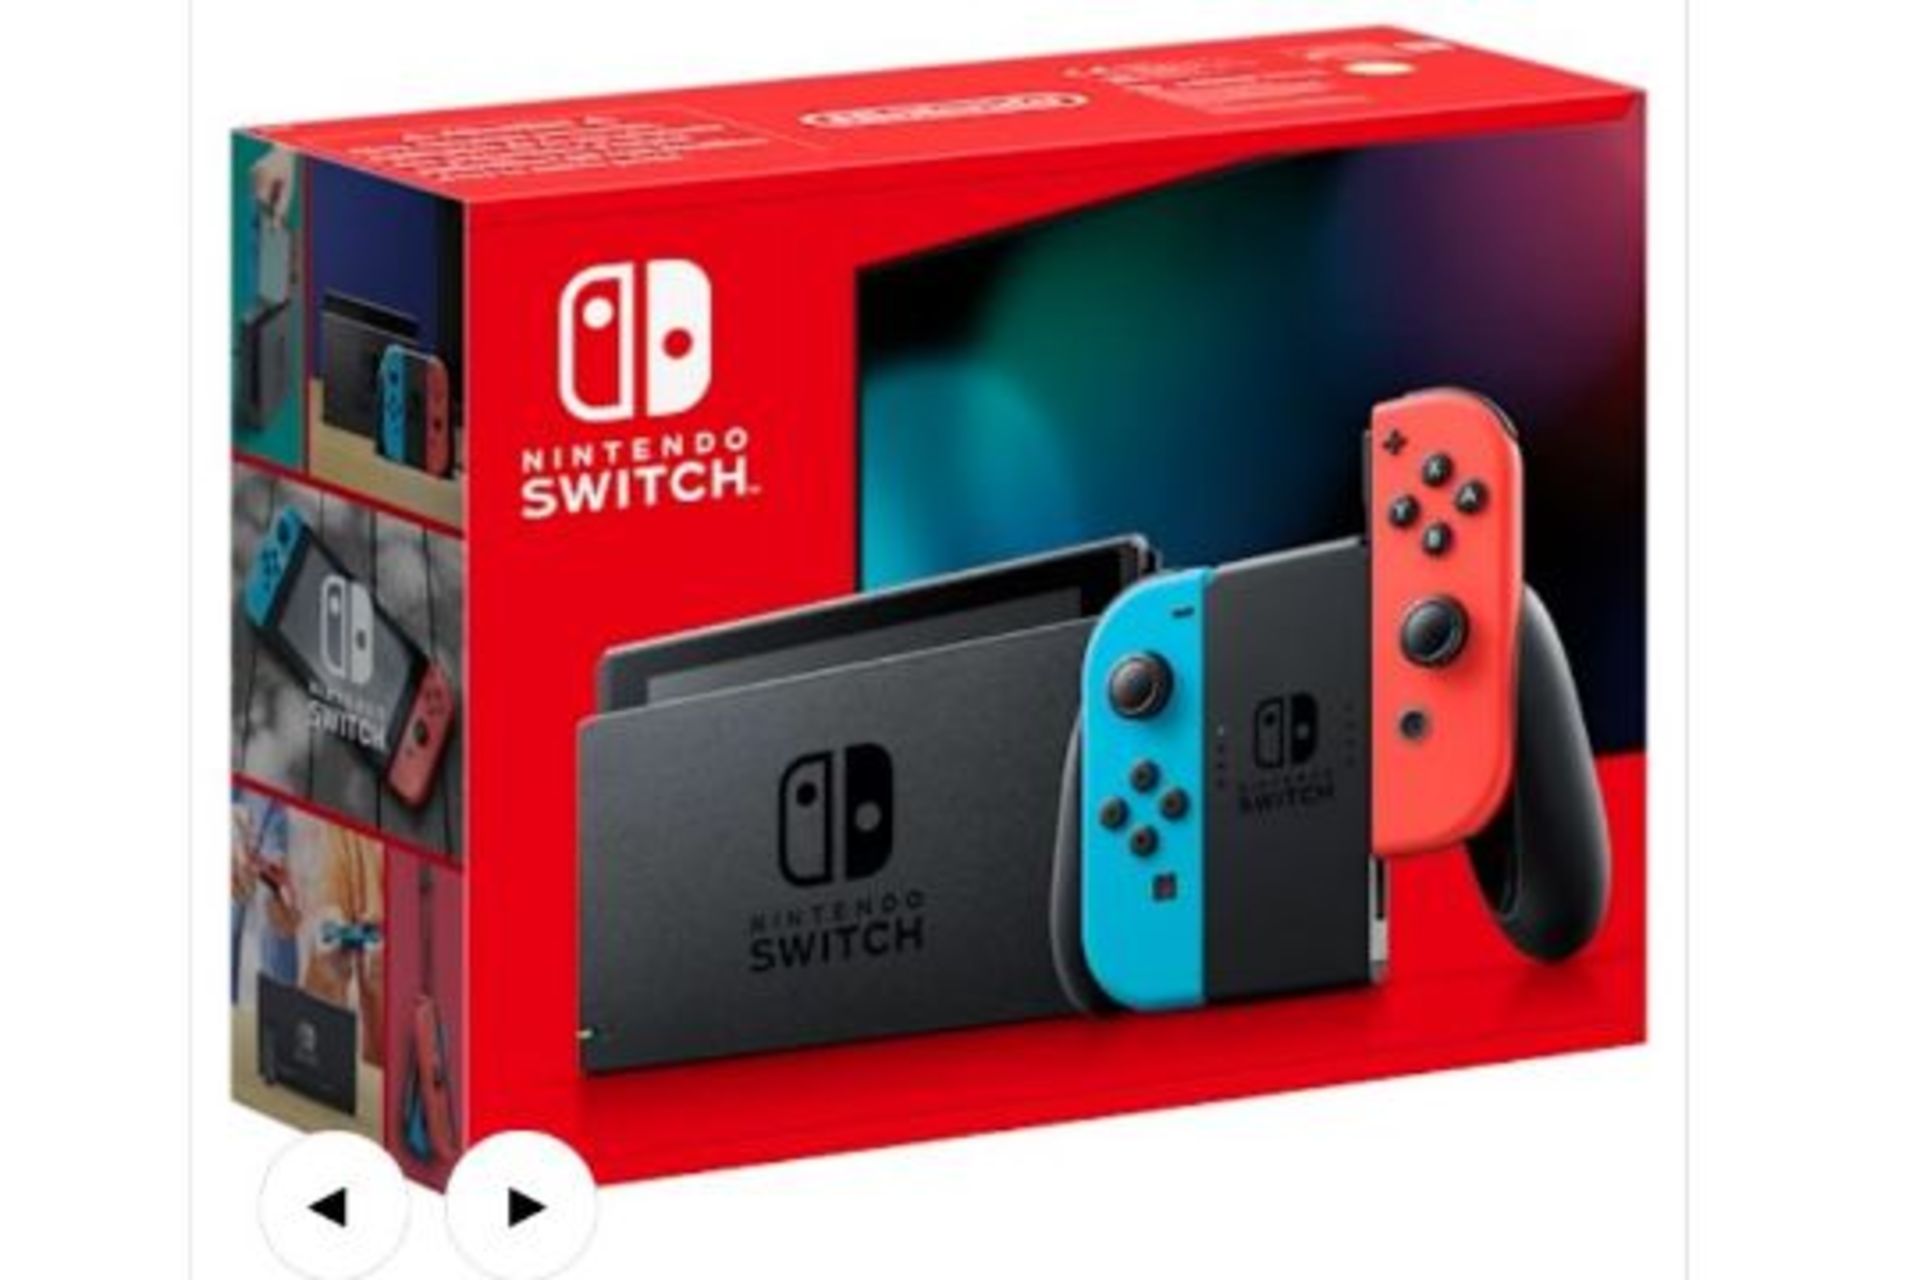 Nintendo Switch Neon Blue / Neon Red Joy-Con Controllers. - P1. RRP £359.99. Nintendo Switch is a